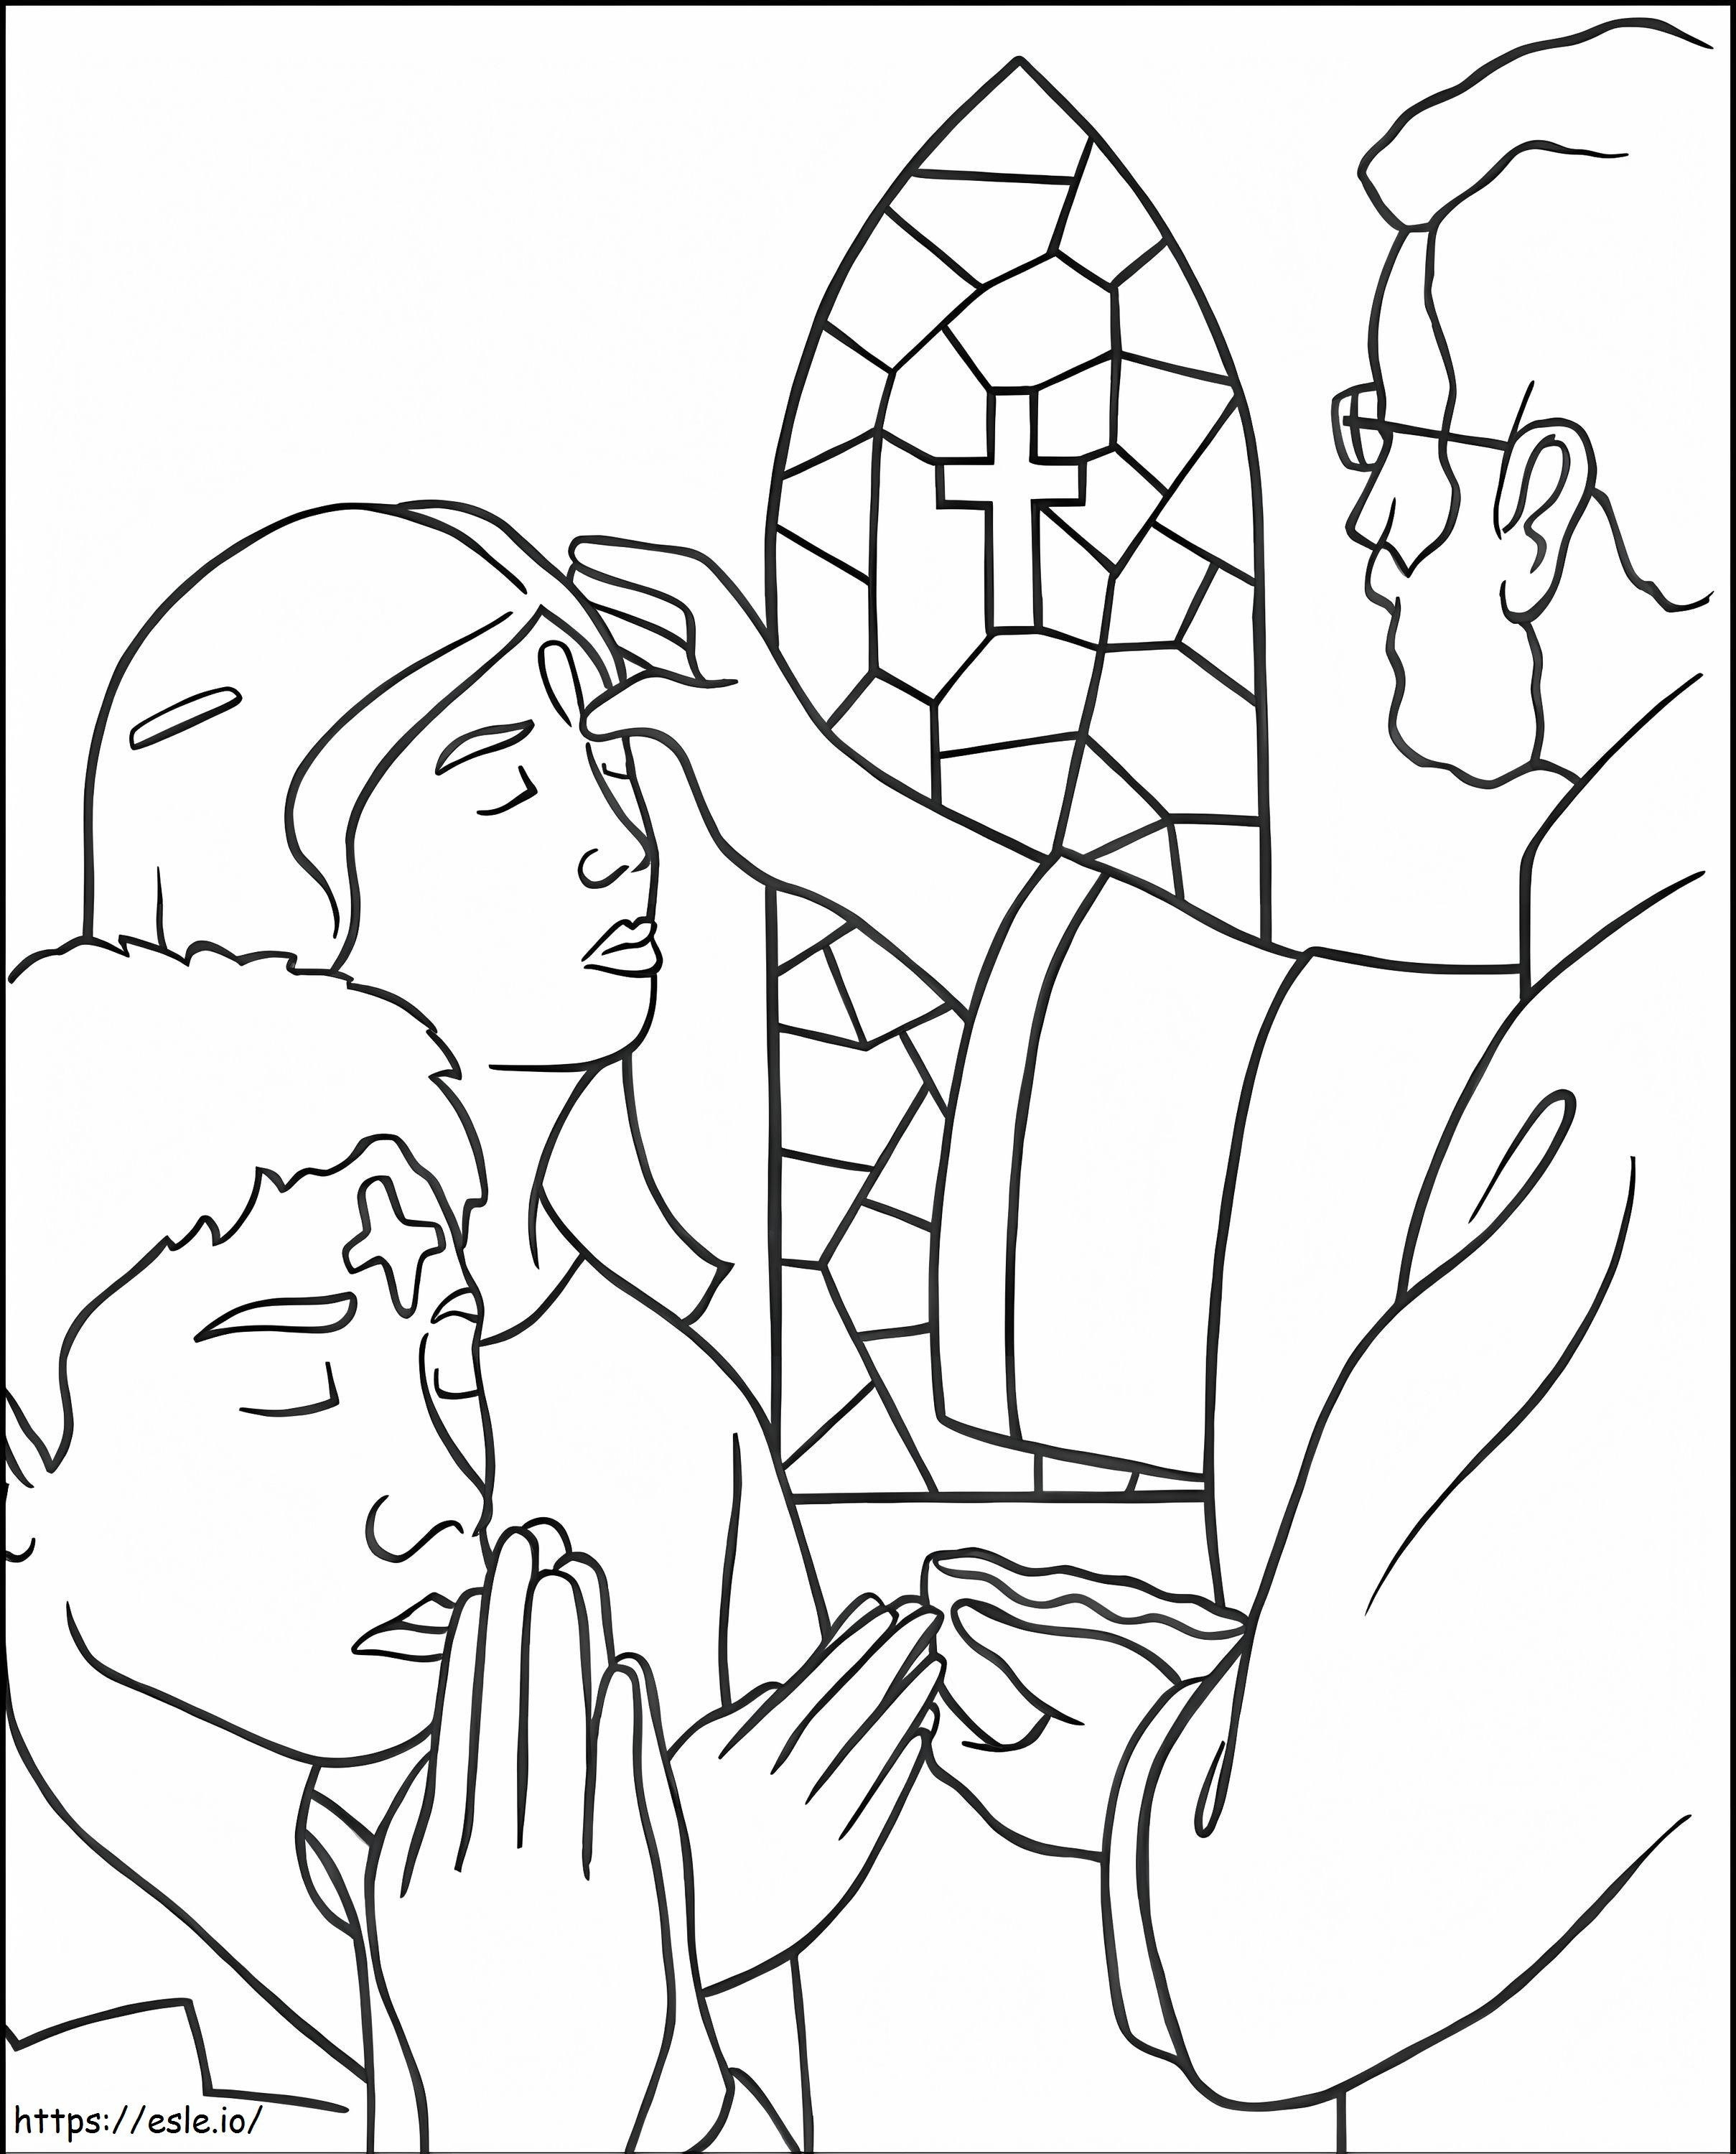 Ash Wednesday 1 coloring page